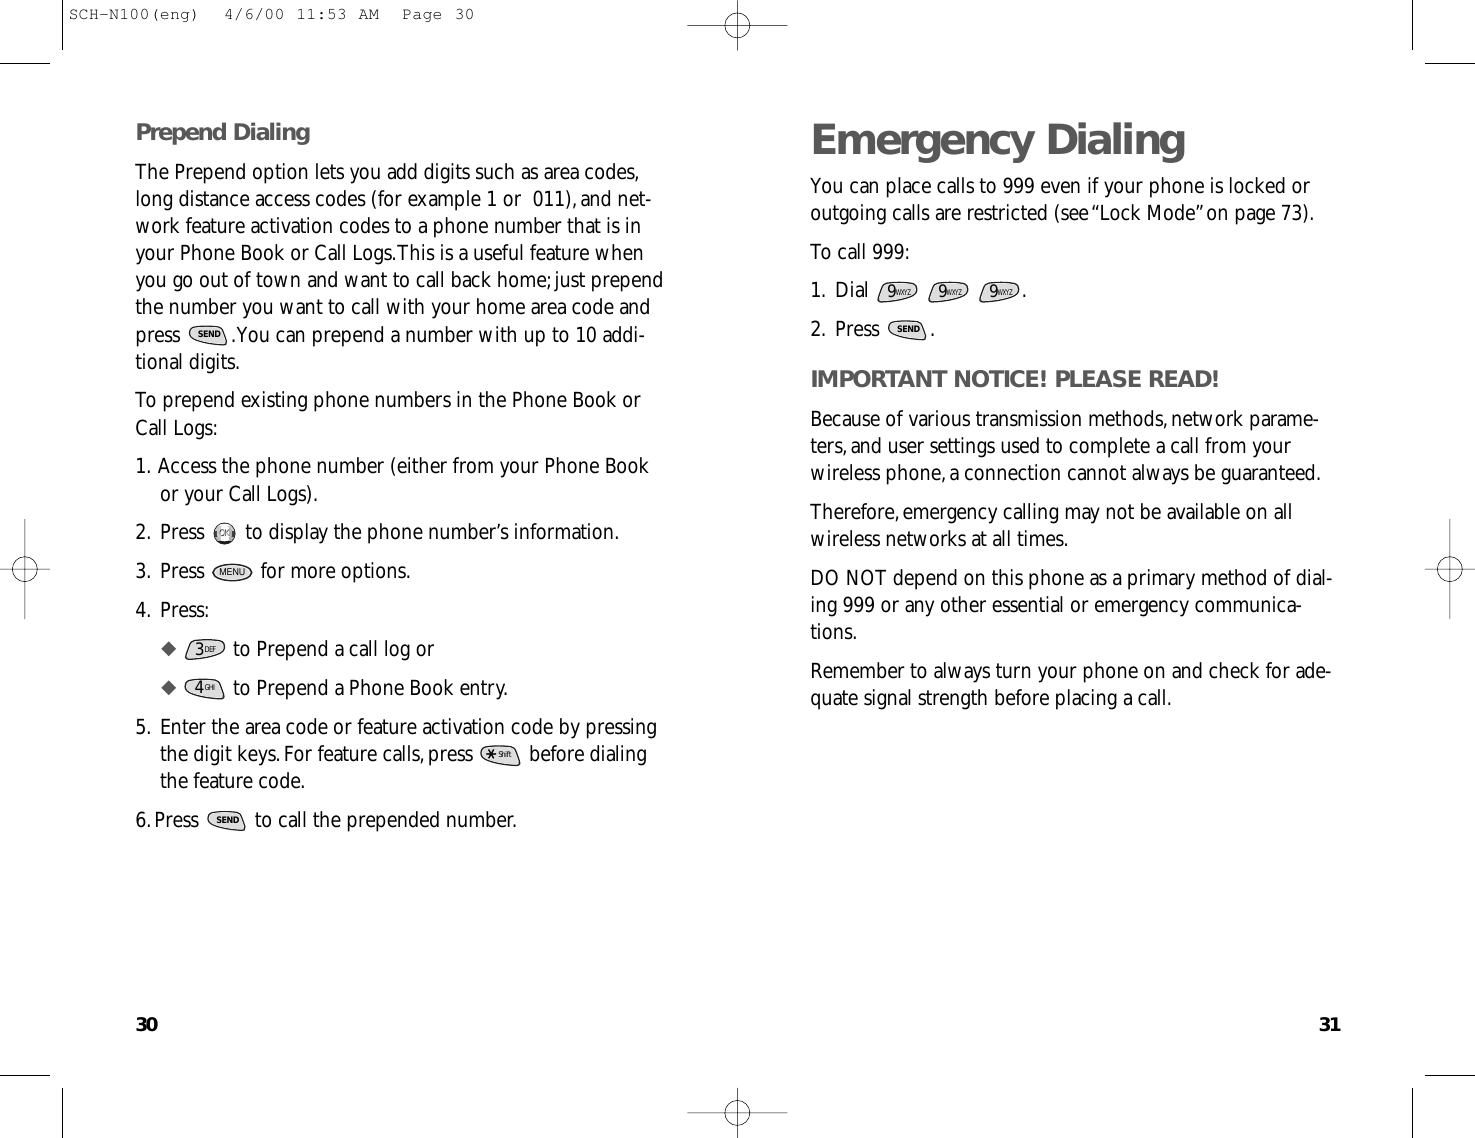 3130Emergency DialingYou can place calls to 999 even if your phone is locked oroutgoing calls are restricted (see “Lock Mode”on page 73).To call 999:1.Dial .2.Press .IMPORTANT NOTICE! PLEASE READ!Because of various transmission methods,network parame-ters,and user settings used to complete a call from yourwireless phone,a connection cannot always be guaranteed.Therefore,emergency calling may not be available on allwireless networks at all times.DO NOT depend on this phone as a primary method of dial-ing 999 or any other essential or emergency communica-tions.Remember to always turn your phone on and check for ade-quate signal strength before placing a call.SEND9WXYZ9WXYZ9WXYZPrepend DialingThe Prepend option lets you add digits such as area codes,long distance access codes (for example 1 or  011),and net-work feature activation codes to a phone number that is inyour Phone Book or Call Logs.This is a useful feature whenyou go out of town and want to call back home;just prependthe number you want to call with your home area code andpress  .You can prepend a number with up to 10 addi-tional digits.To prepend existing phone numbers in the Phone Book orCall Logs:1.Access the phone number (either from your Phone Bookor your Call Logs).2.Press  to display the phone number’s information.3.Press  for more options.4.Press:◆ to Prepend a call log or◆ to Prepend a Phone Book entry.5.Enter the area code or feature activation code by pressingthe digit keys.For feature calls,press  before dialingthe feature code.6.Press  to call the prepended number.SENDShiftGHI43DEFMENUOKOKSENDSCH-N100(eng)  4/6/00 11:53 AM  Page 30